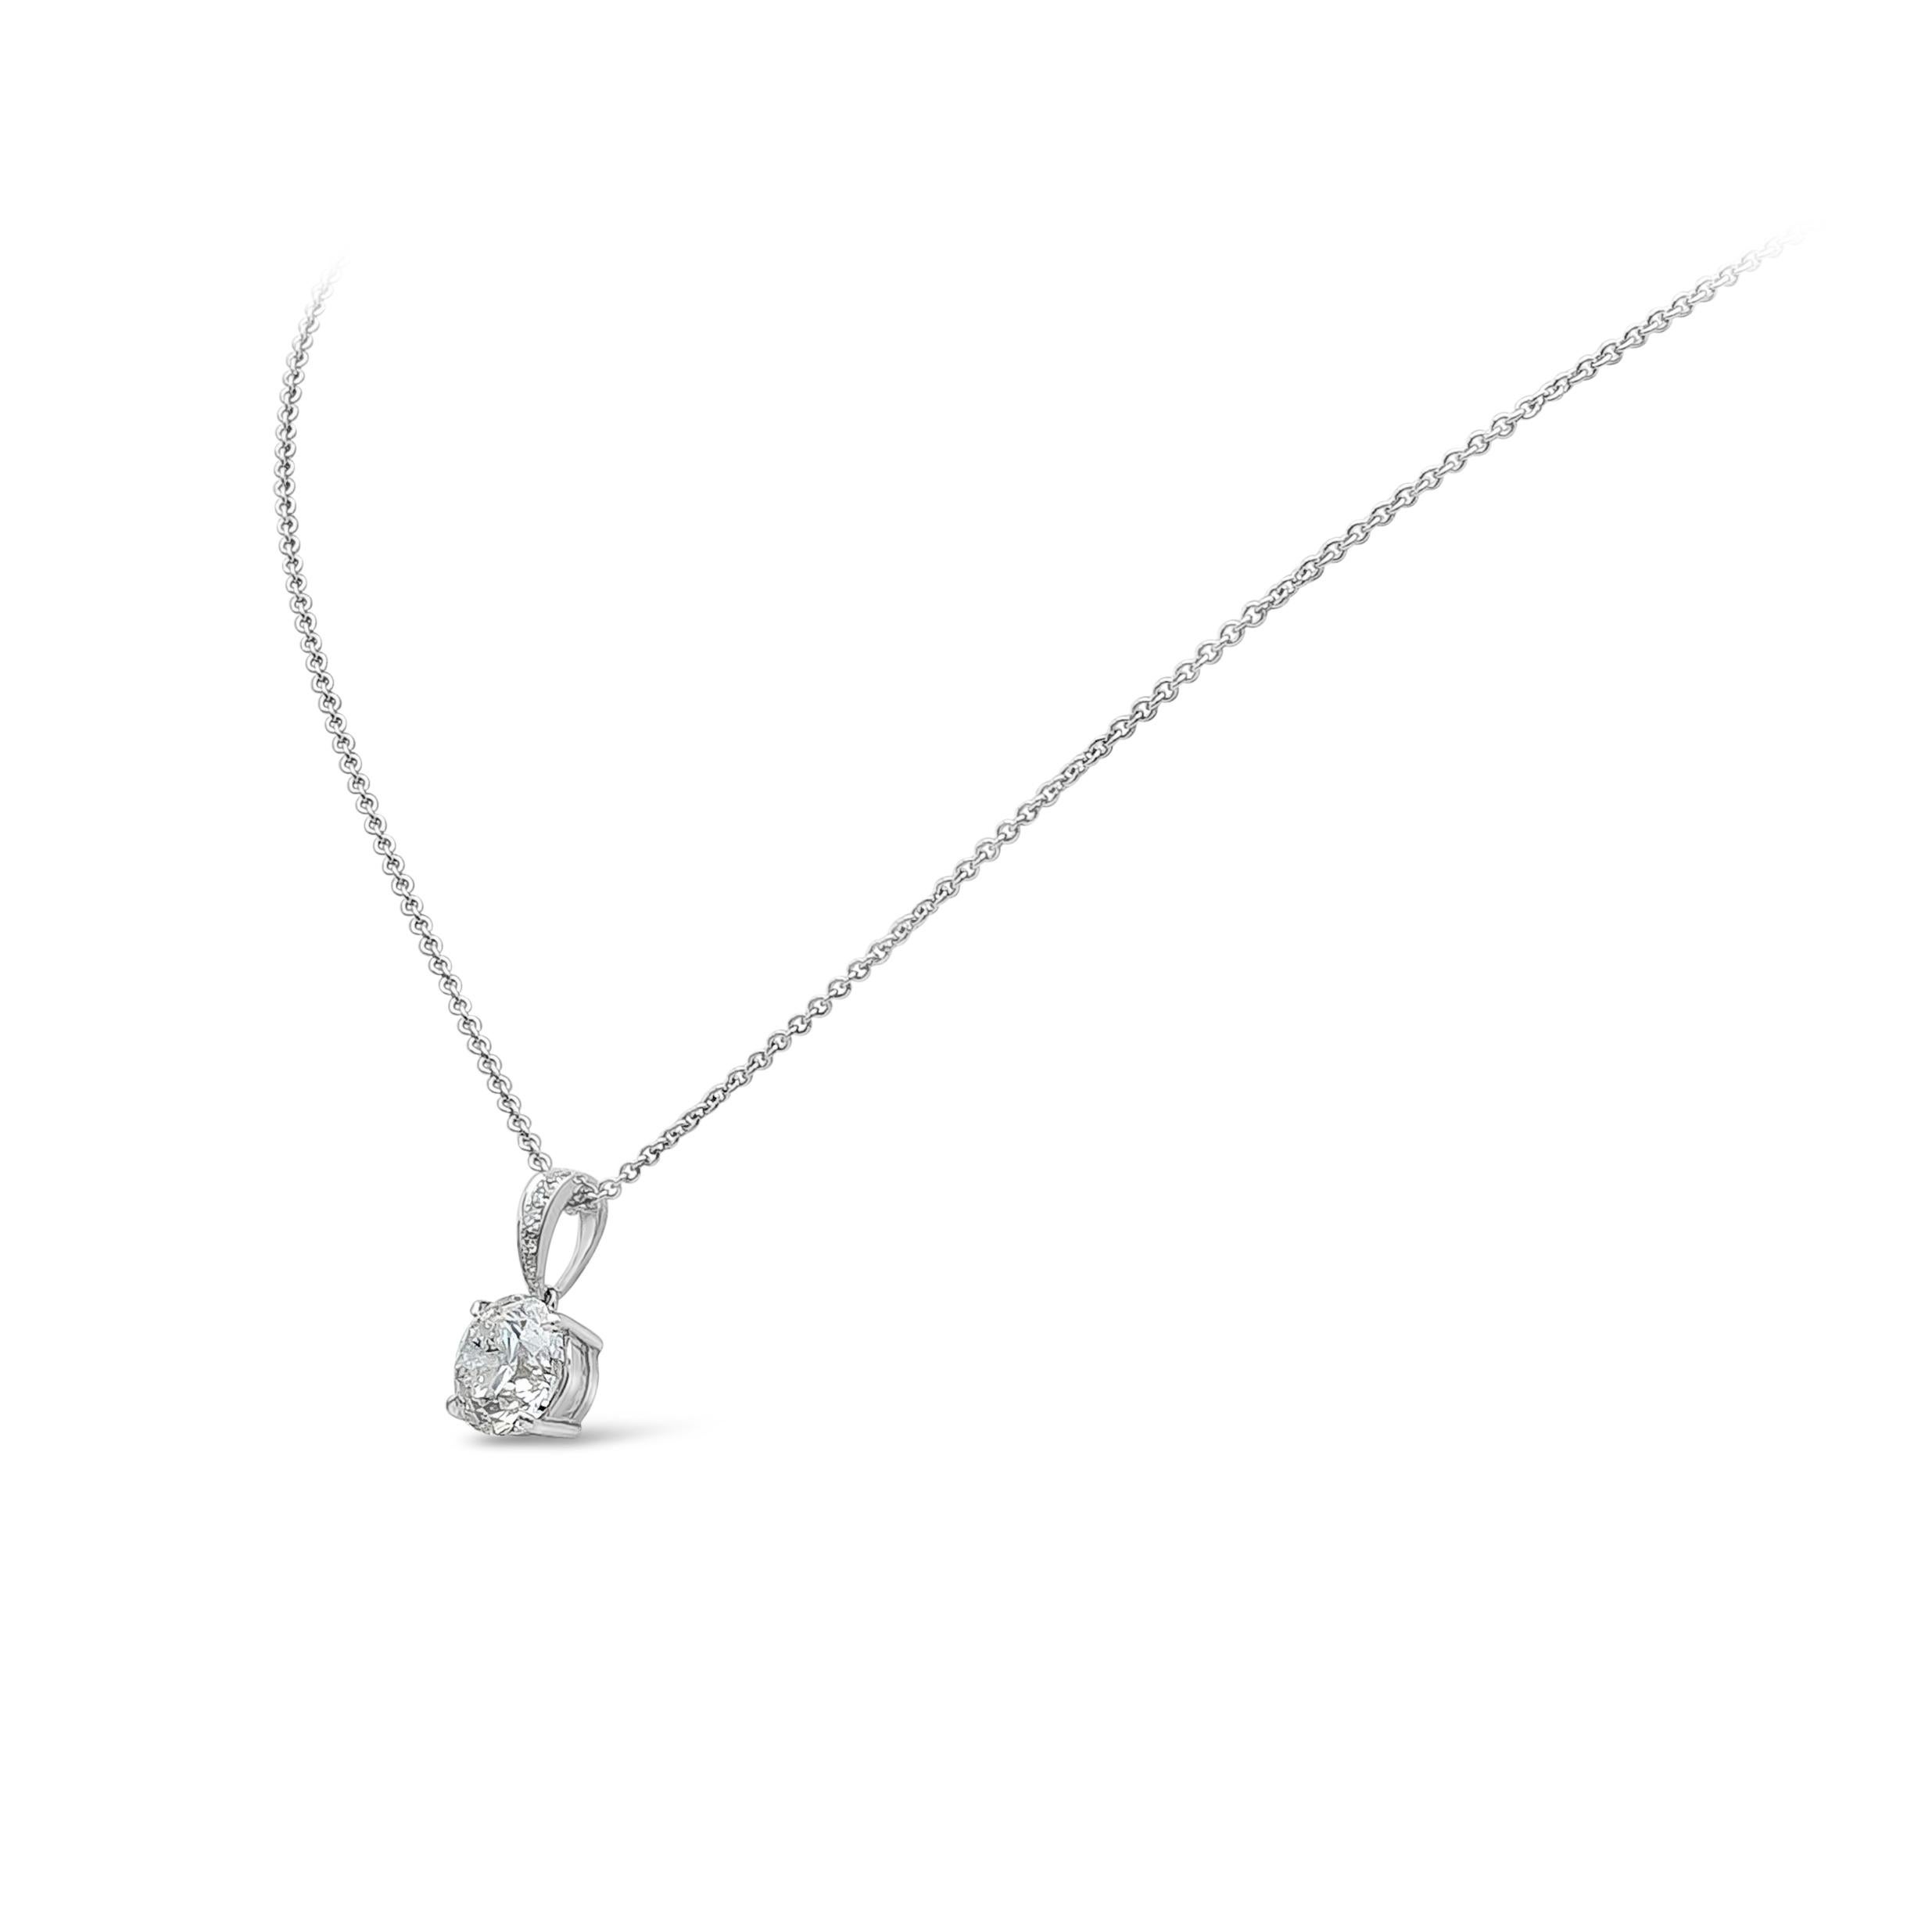 A classic and simple solitaire pendant necklace showcasing a 2.27 carat total, F Color and I1 in Clarity. Suspended on a diamond encrusted bail weighing 0.07 carats, F Color and VS-Si in Clarity. 
Set in a timeless 4 prong setting, Made with 18K